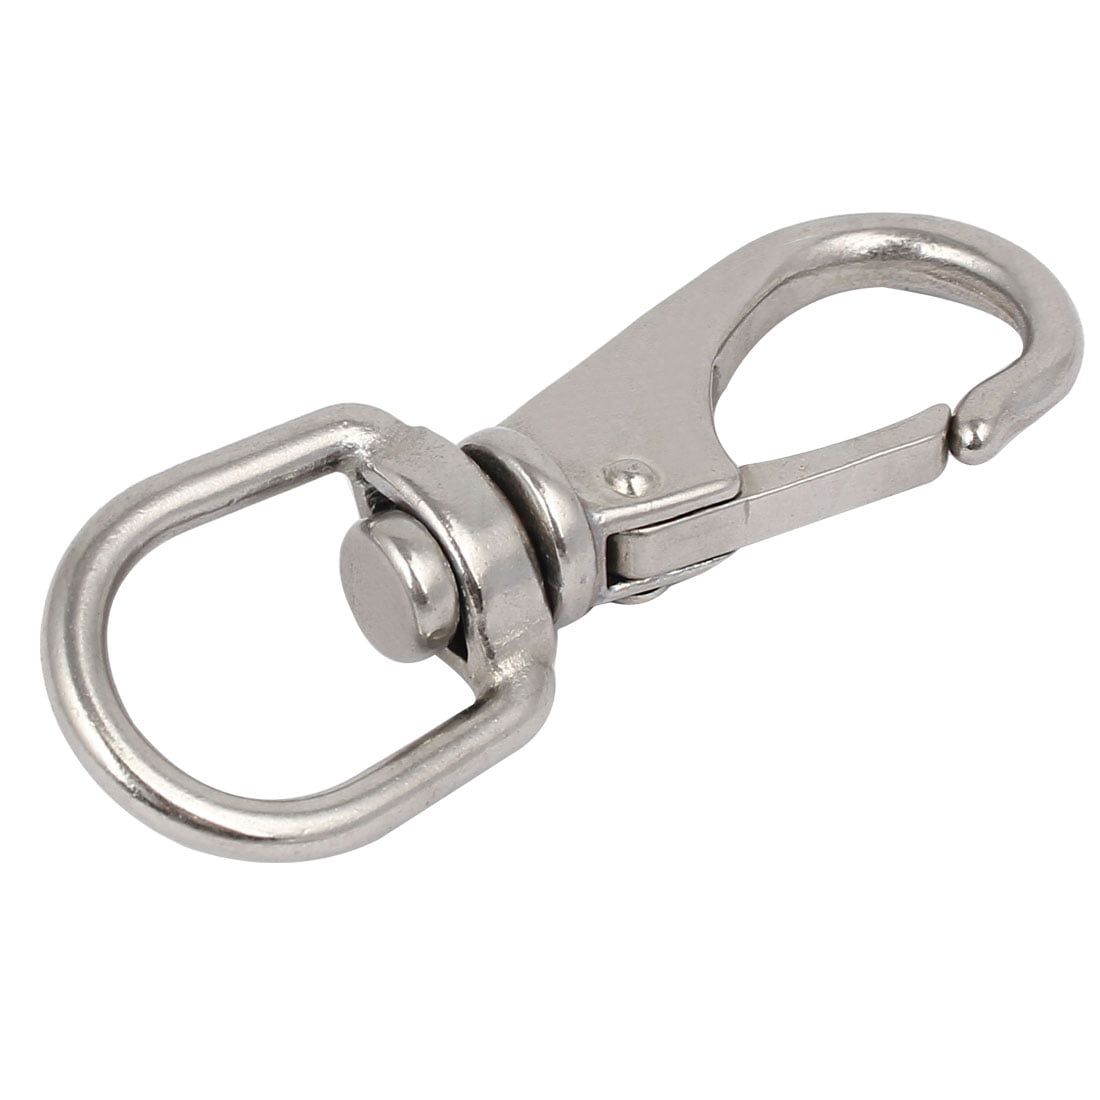 Ranbo 304 Stainless Steel Swivel Eye Snap Lobster Lifting Clasp snap Hook with Latch 330 LB Working Load Limit 3/16 inch 